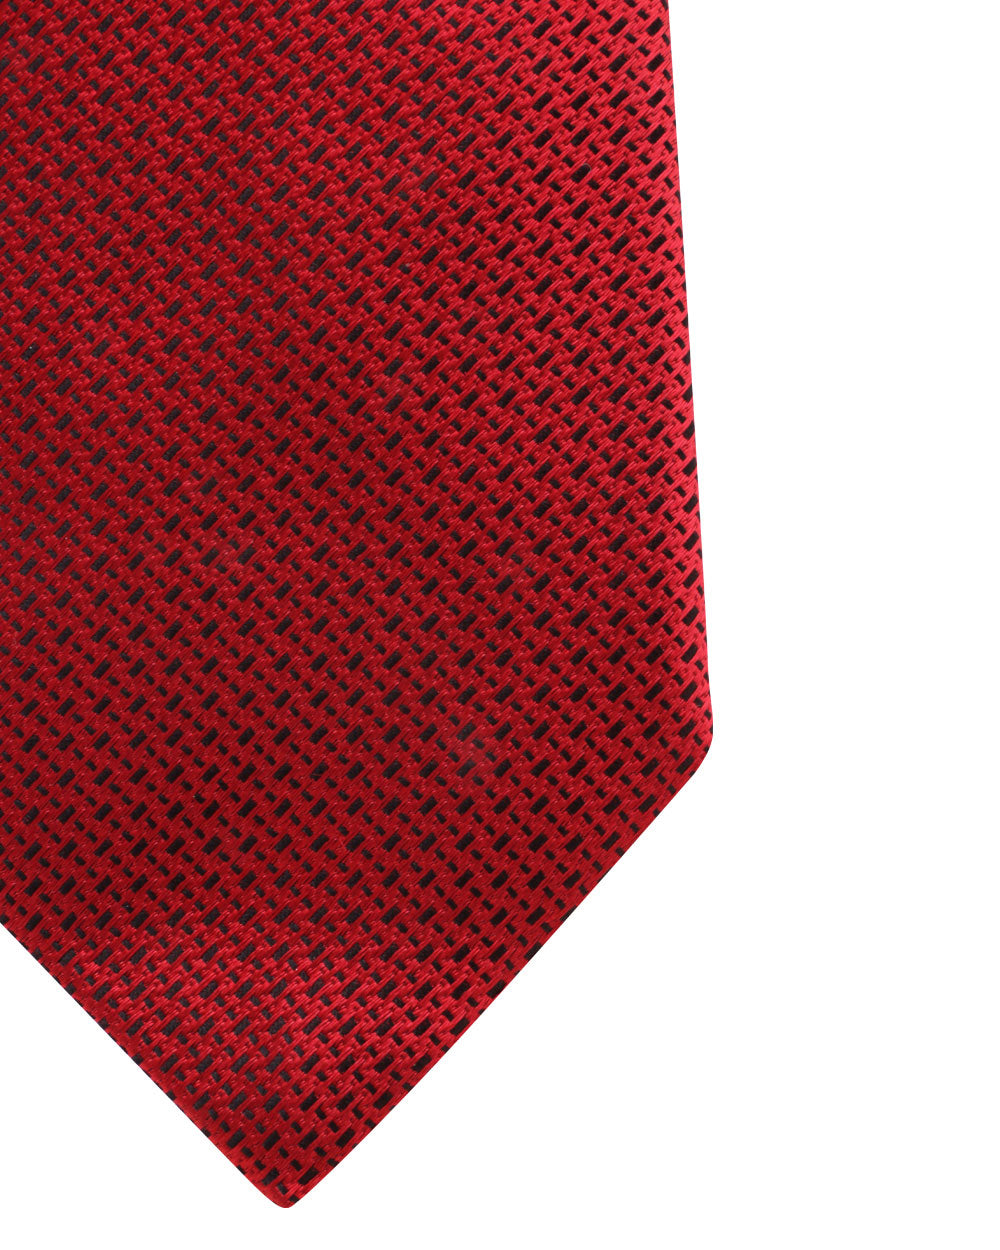 Red and Black Micro Patterned Tie